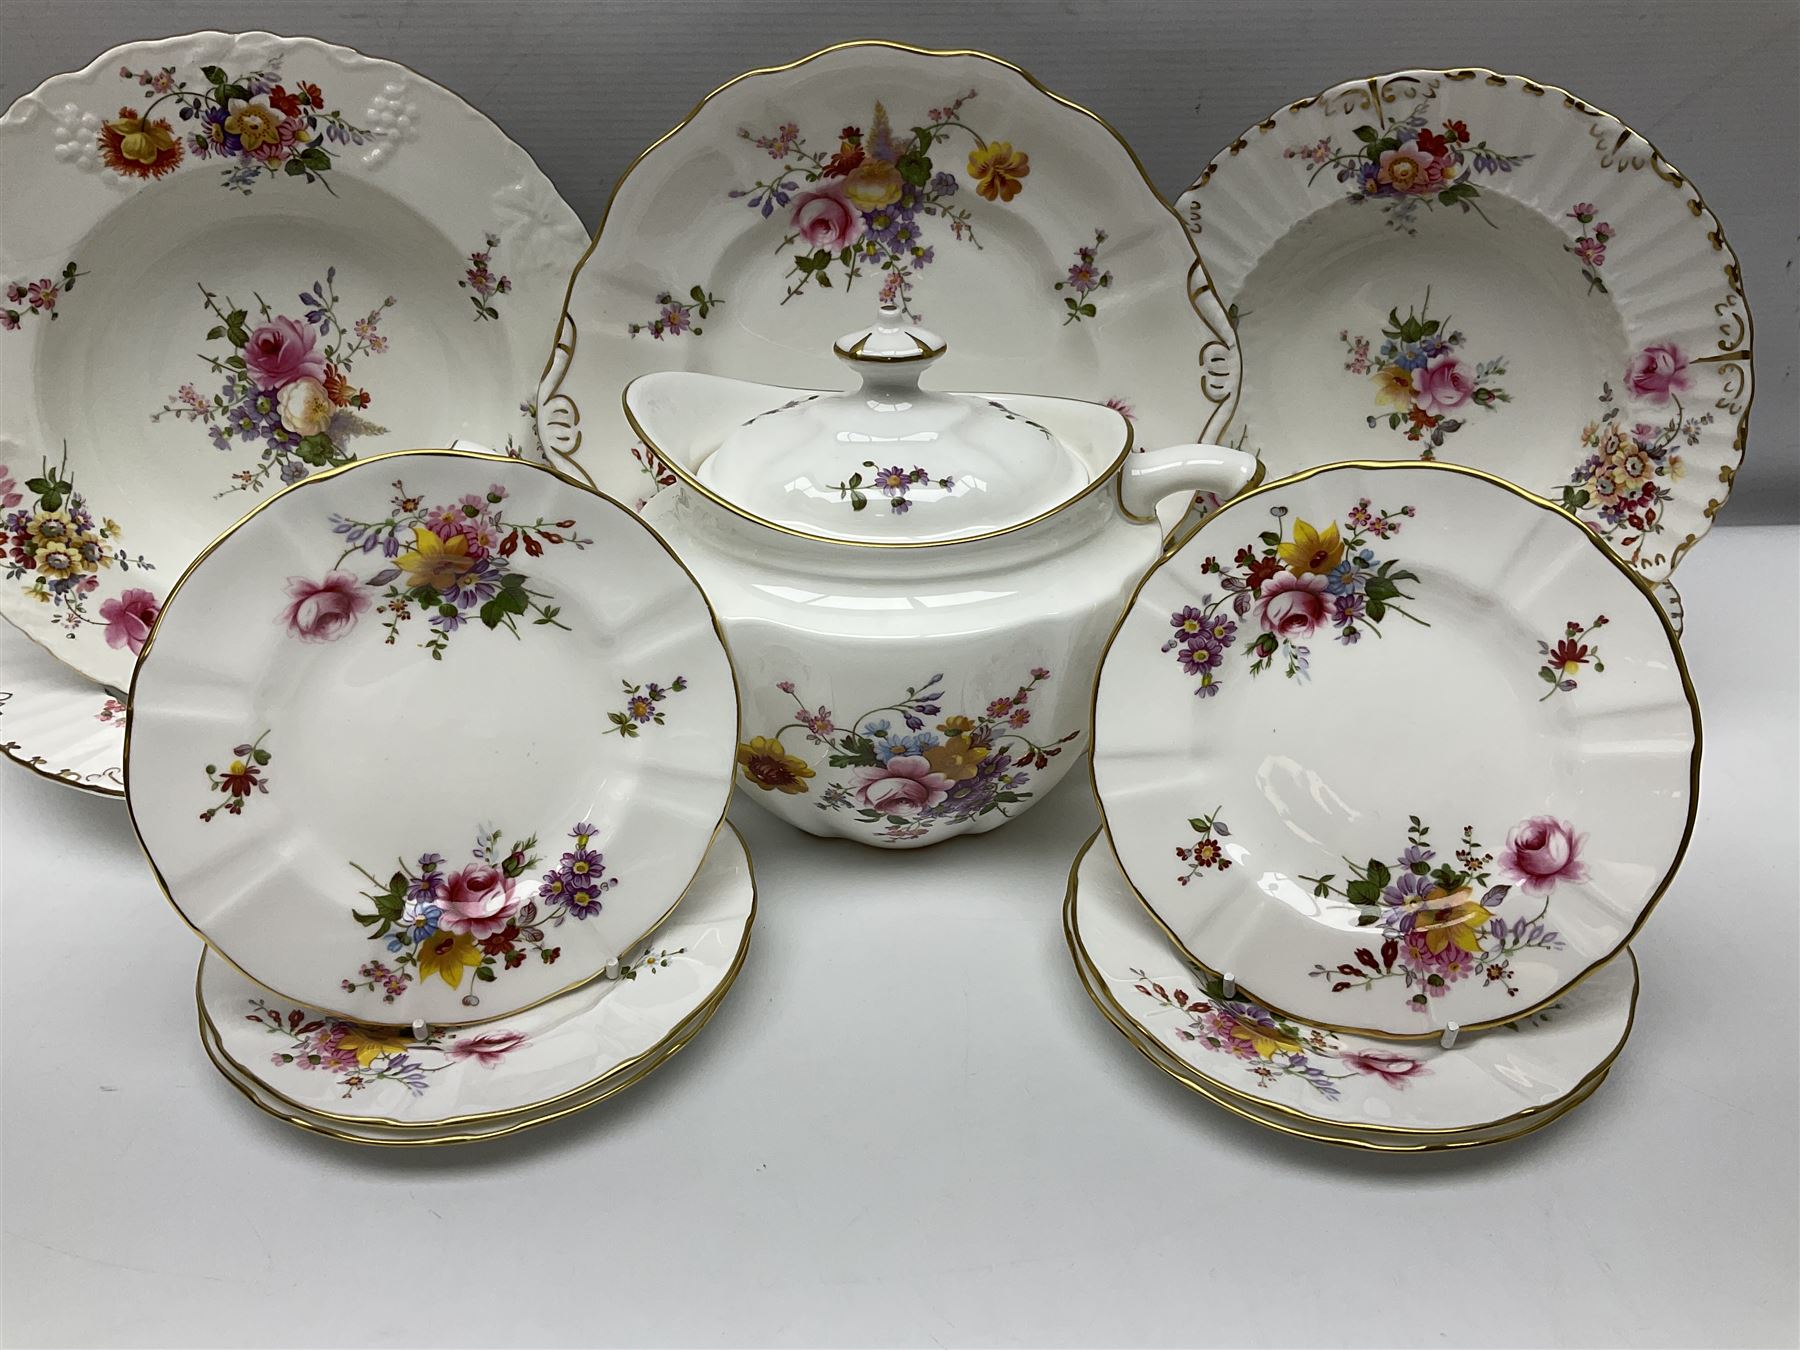 Royal Crown Derby Posies pattern tea service for six - Image 7 of 16